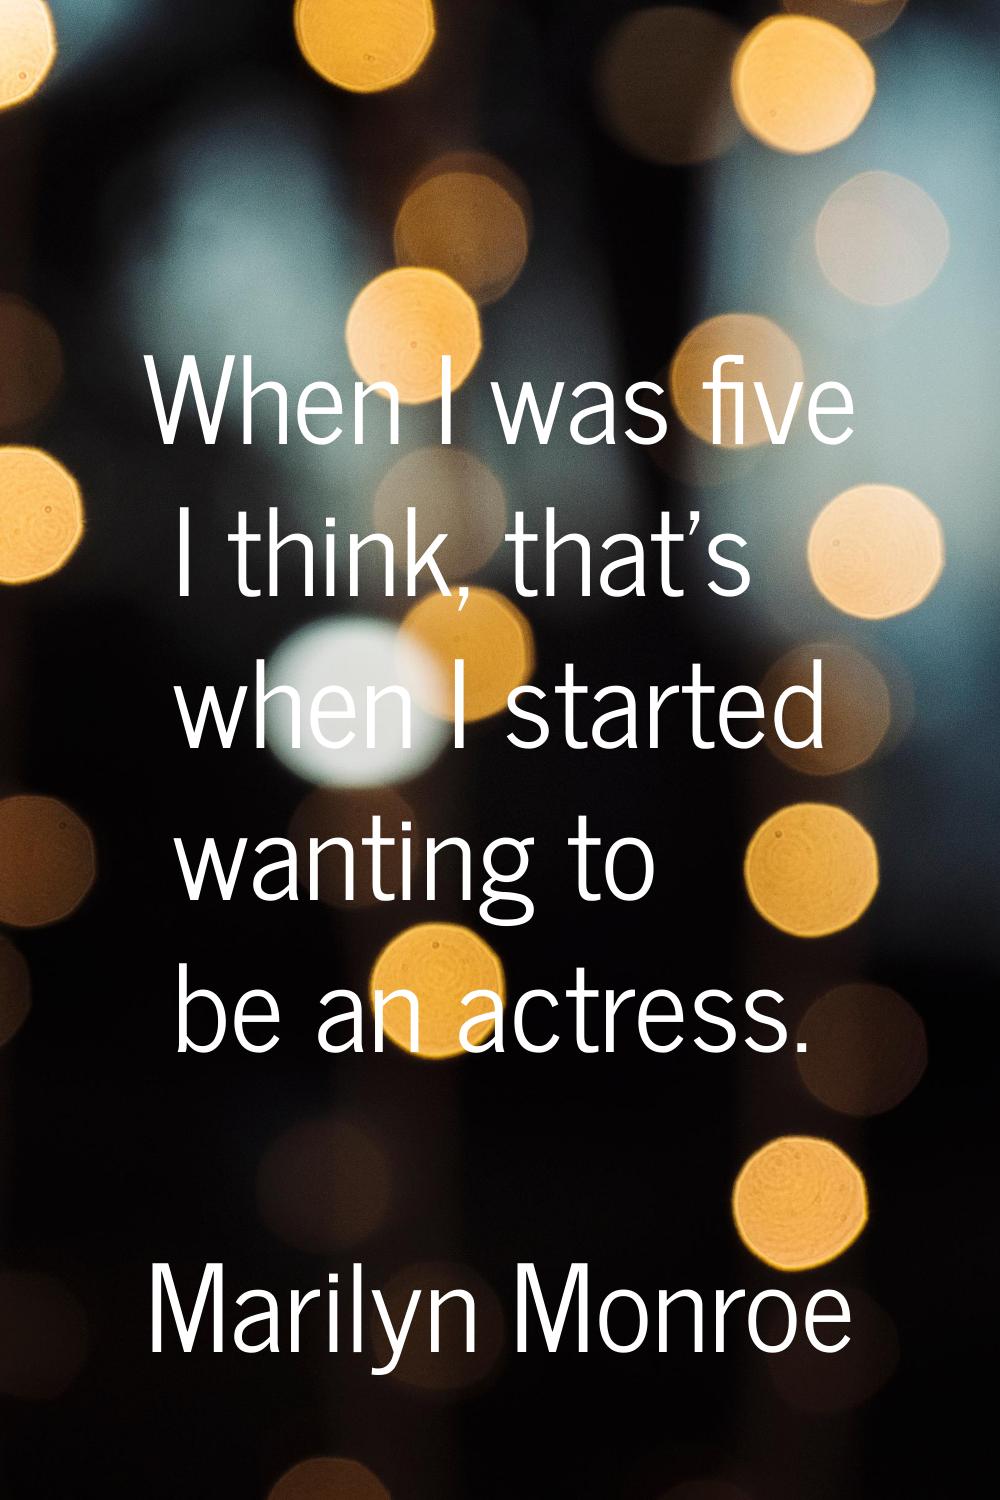 When I was five I think, that's when I started wanting to be an actress.